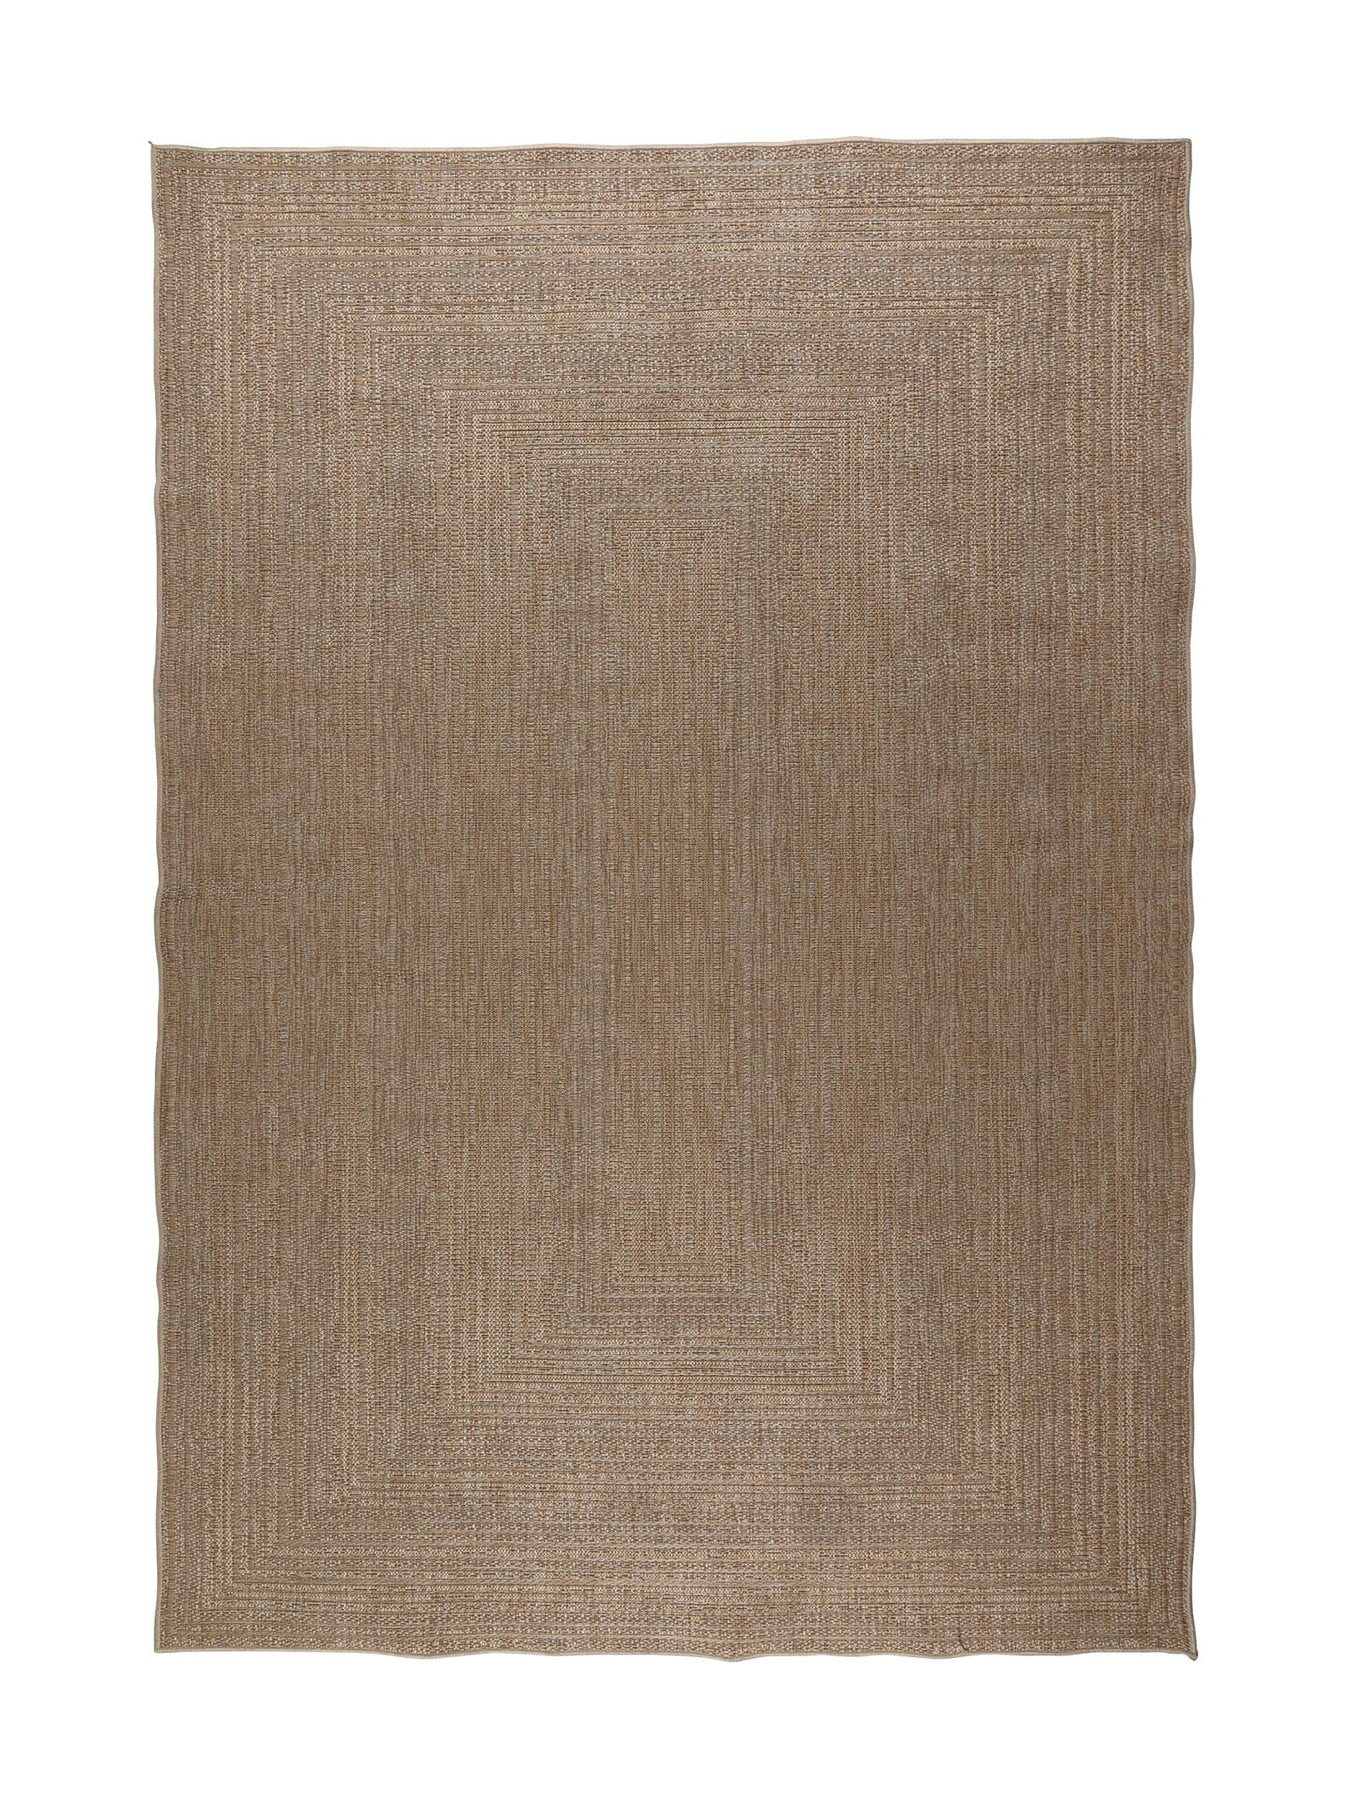 Bali Outdoor Rug in Natural